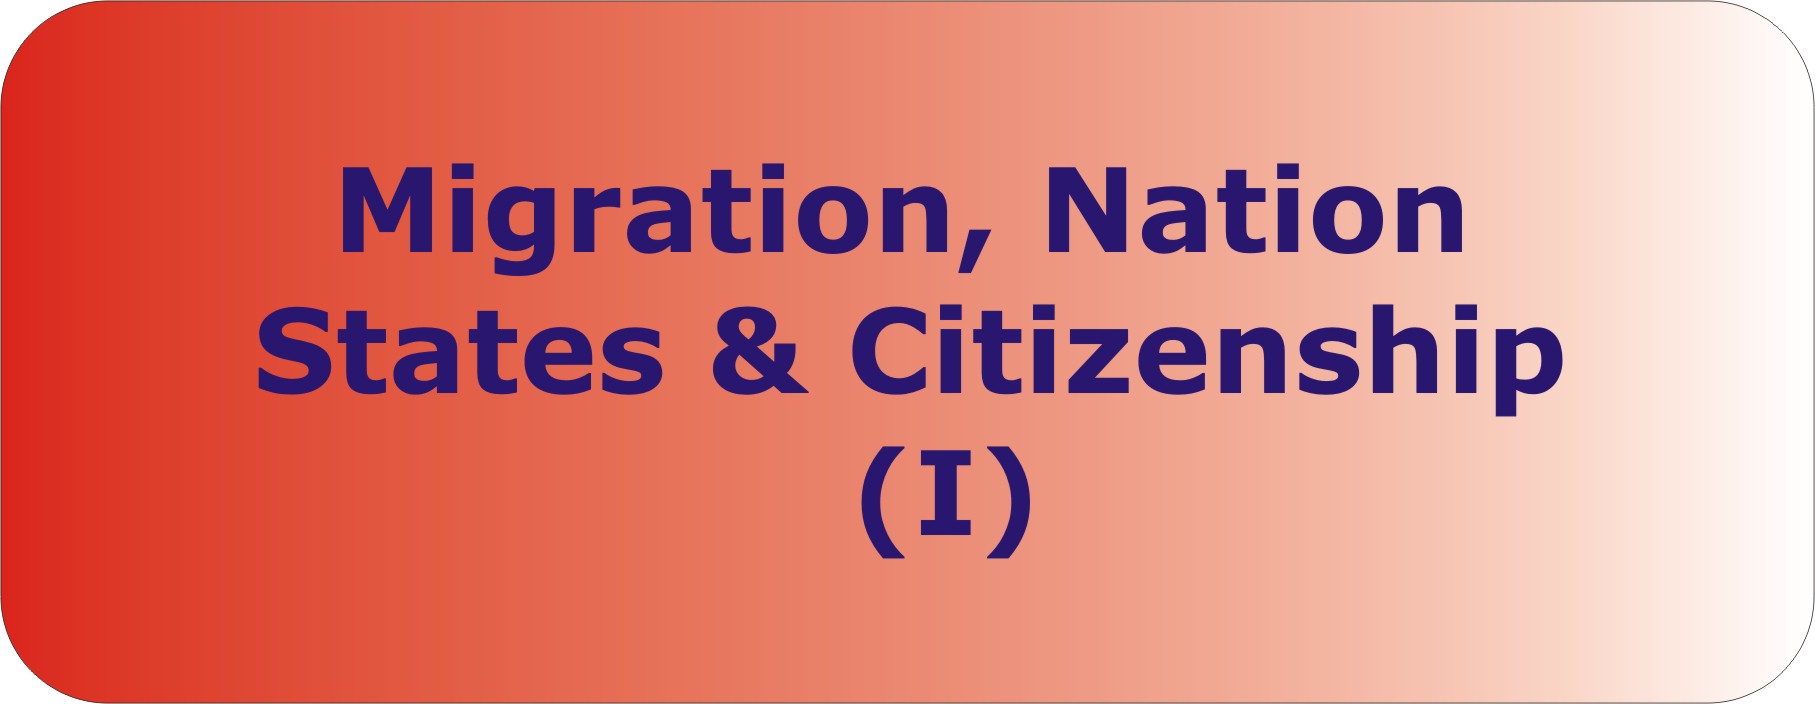 Migration, Nation States and Citizenship (I)